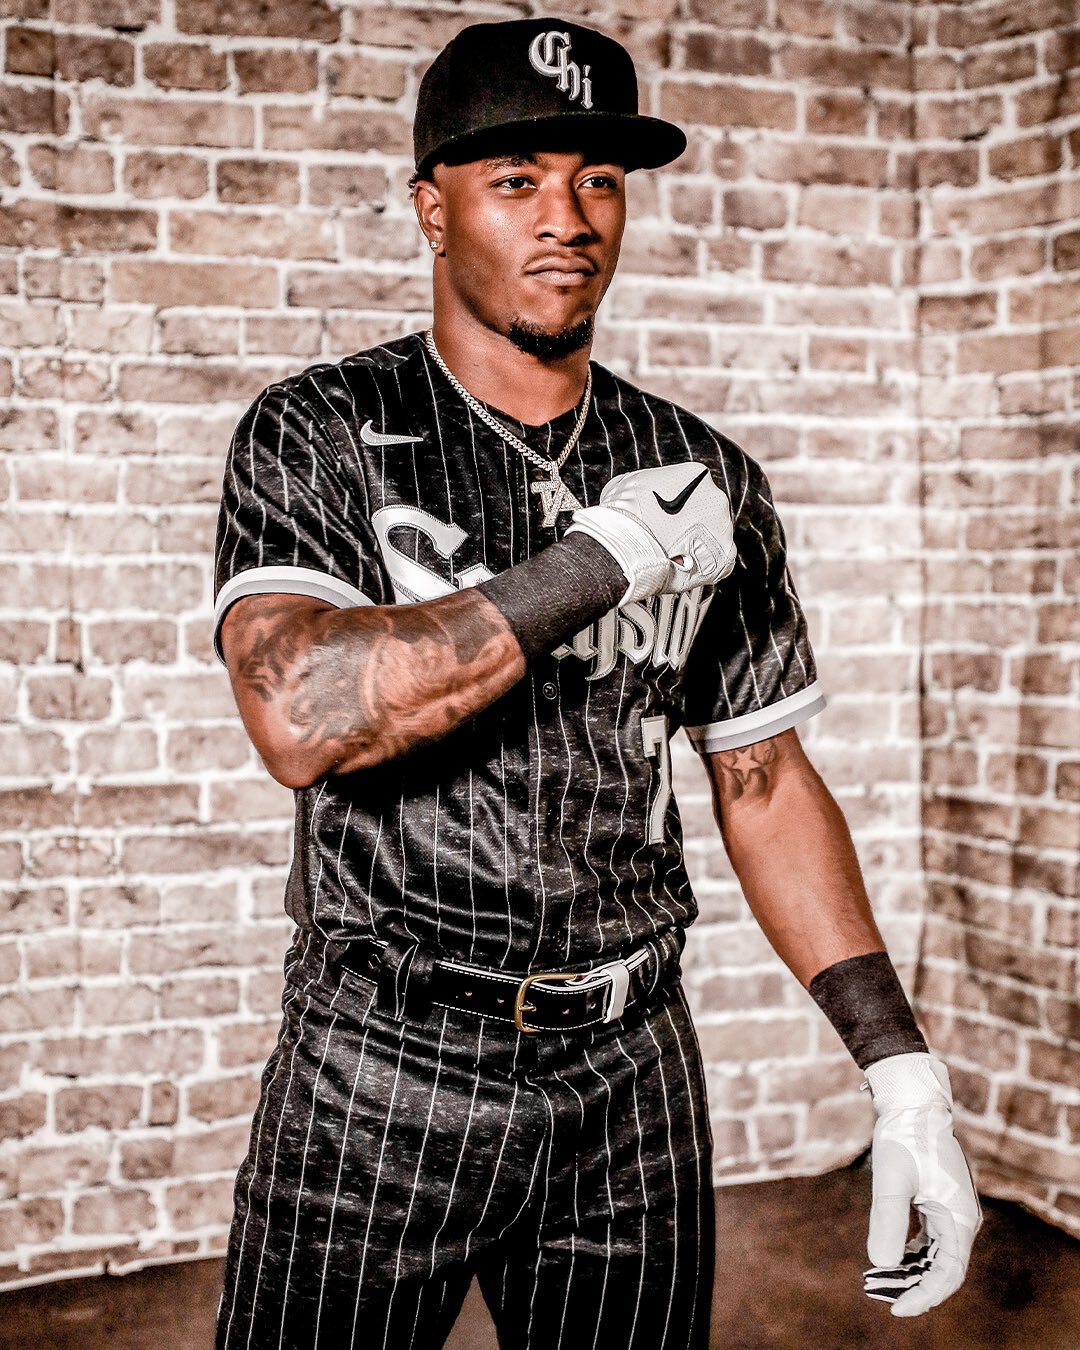 Alternate White Sox uniforms for 2014 revealed - South Side Sox